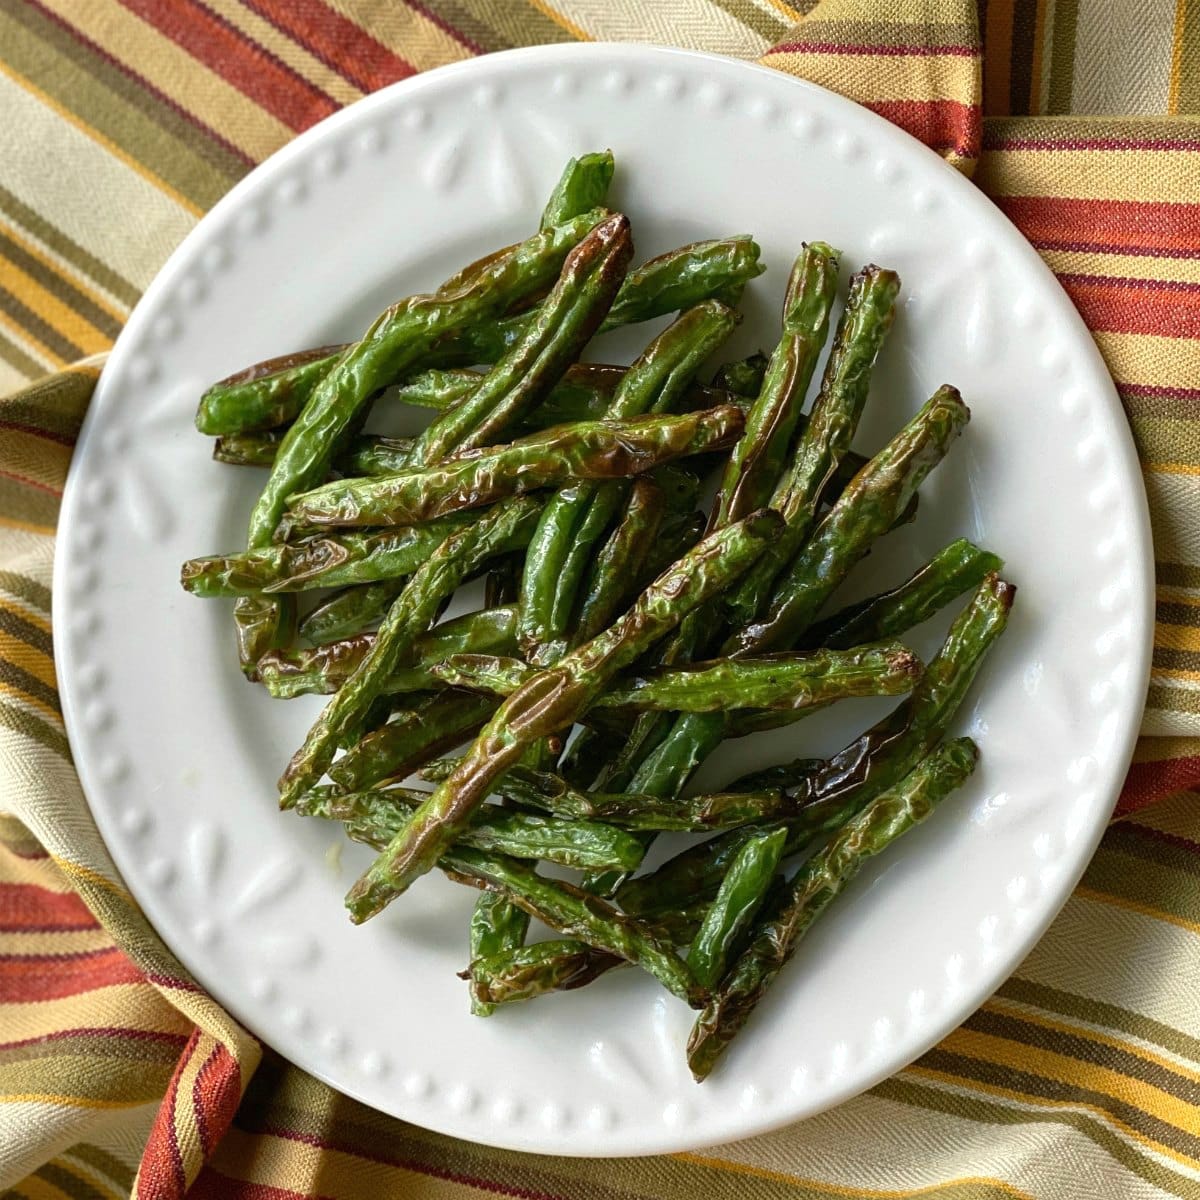 Grilled green beans on a plate.